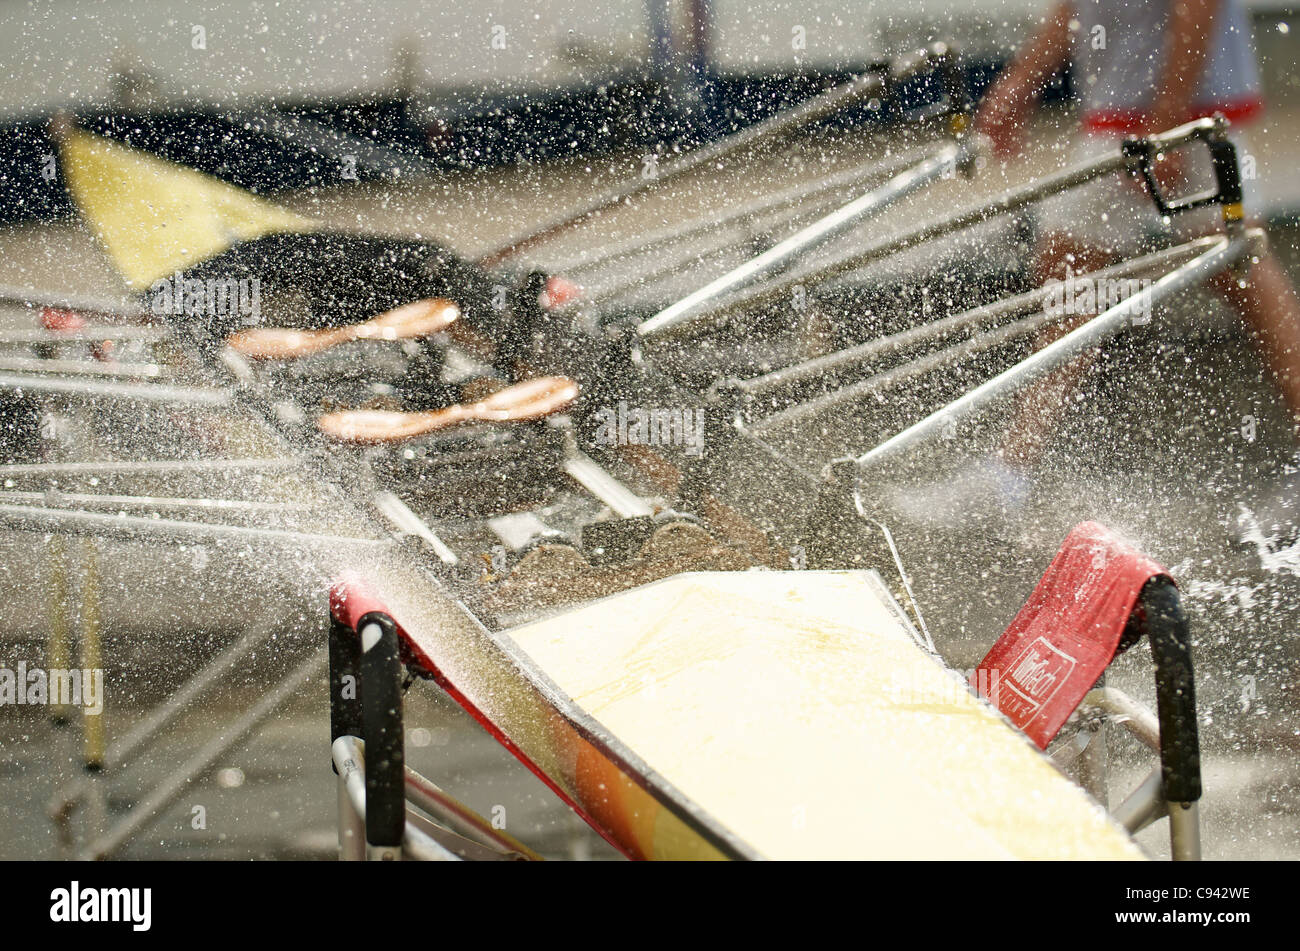 A rower washing his double scull rowboat. Stock Photo